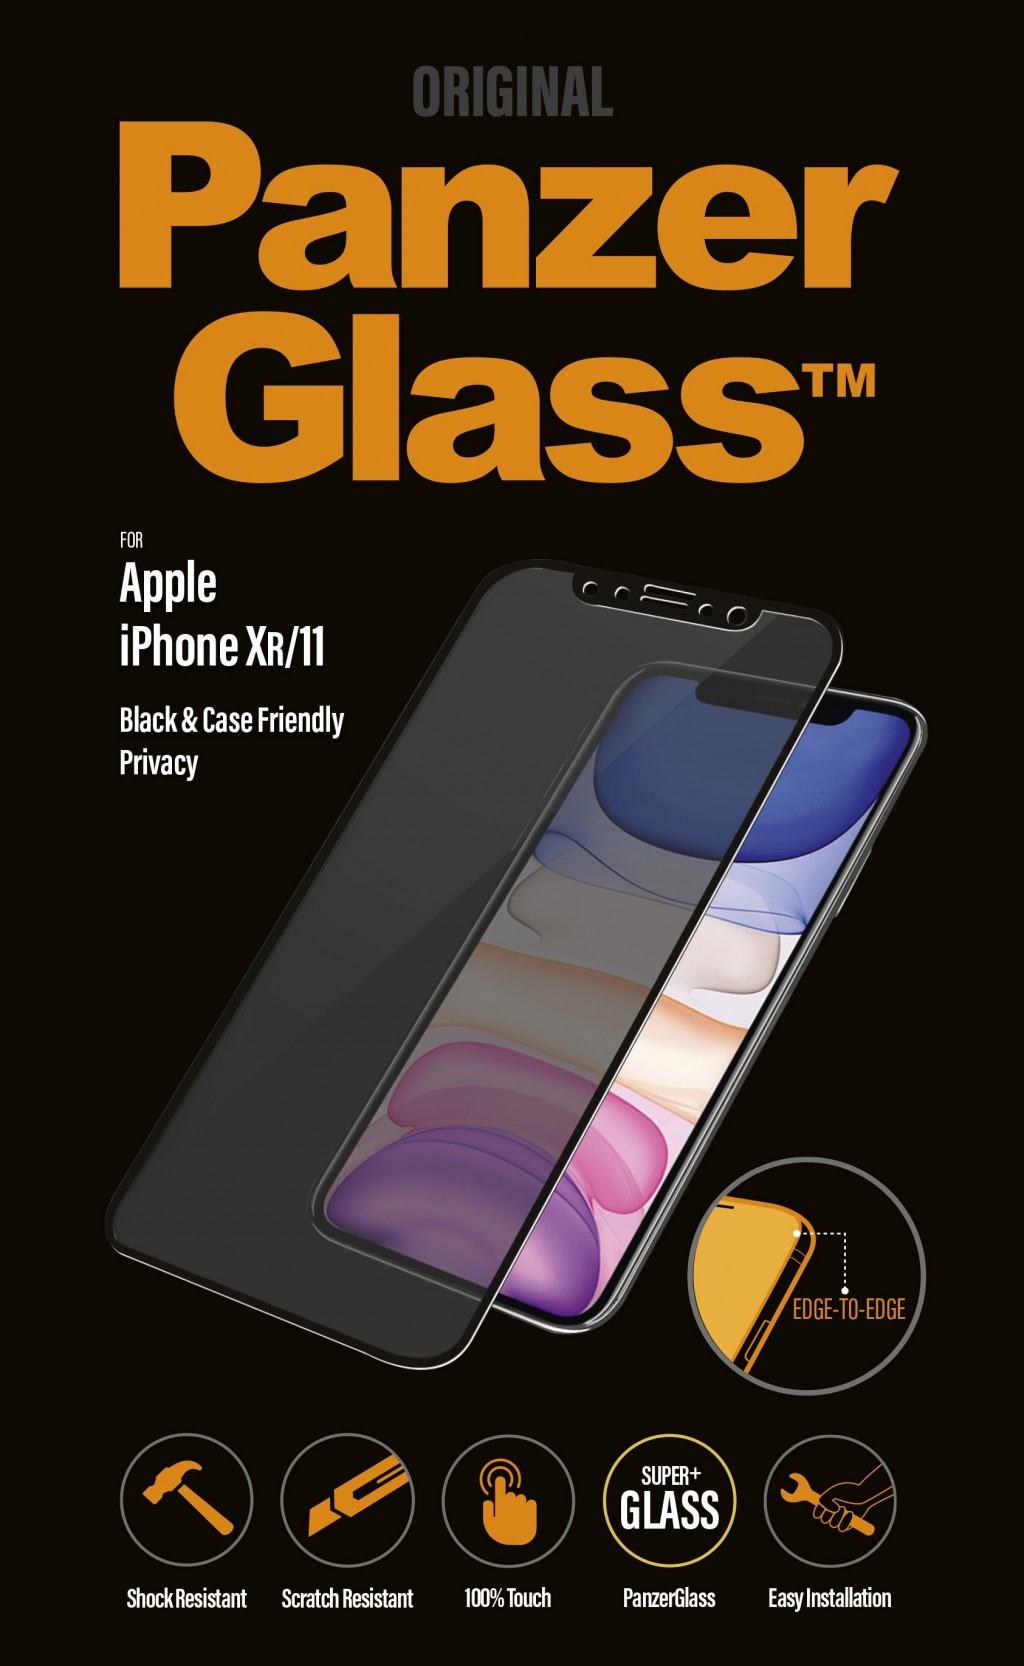 PanzerGlass | P2665 | Screen protector | Apple | iPhone Xr/11 | Tempered glass | Black | Confidentiality filter; Full frame coverage; Anti-shatter film (holds the glass together and protects against glass shards in case of breakage); Case Friendly – compatible with all Cases; Anti-glare coating (reduces light reflection); Blue light reduction; Easy